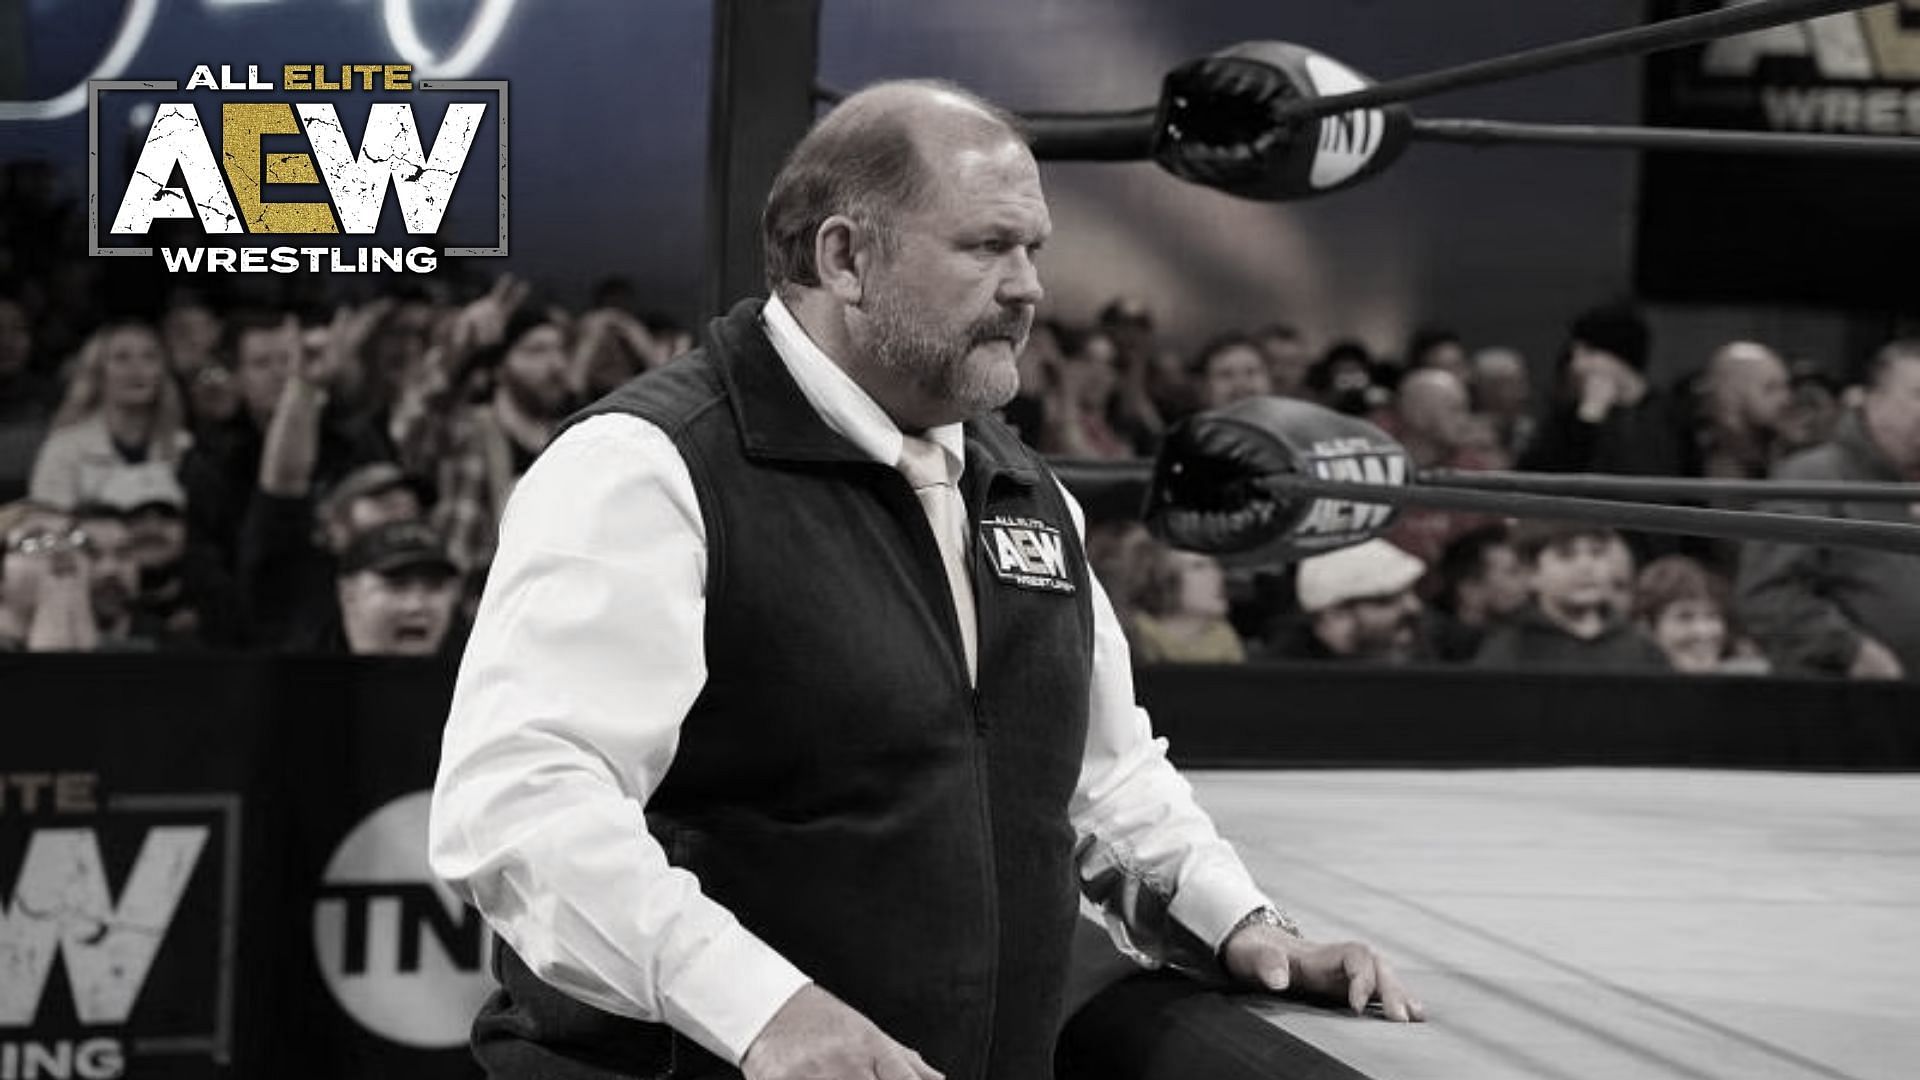 Arn Anderson suffered a tragic loss this week